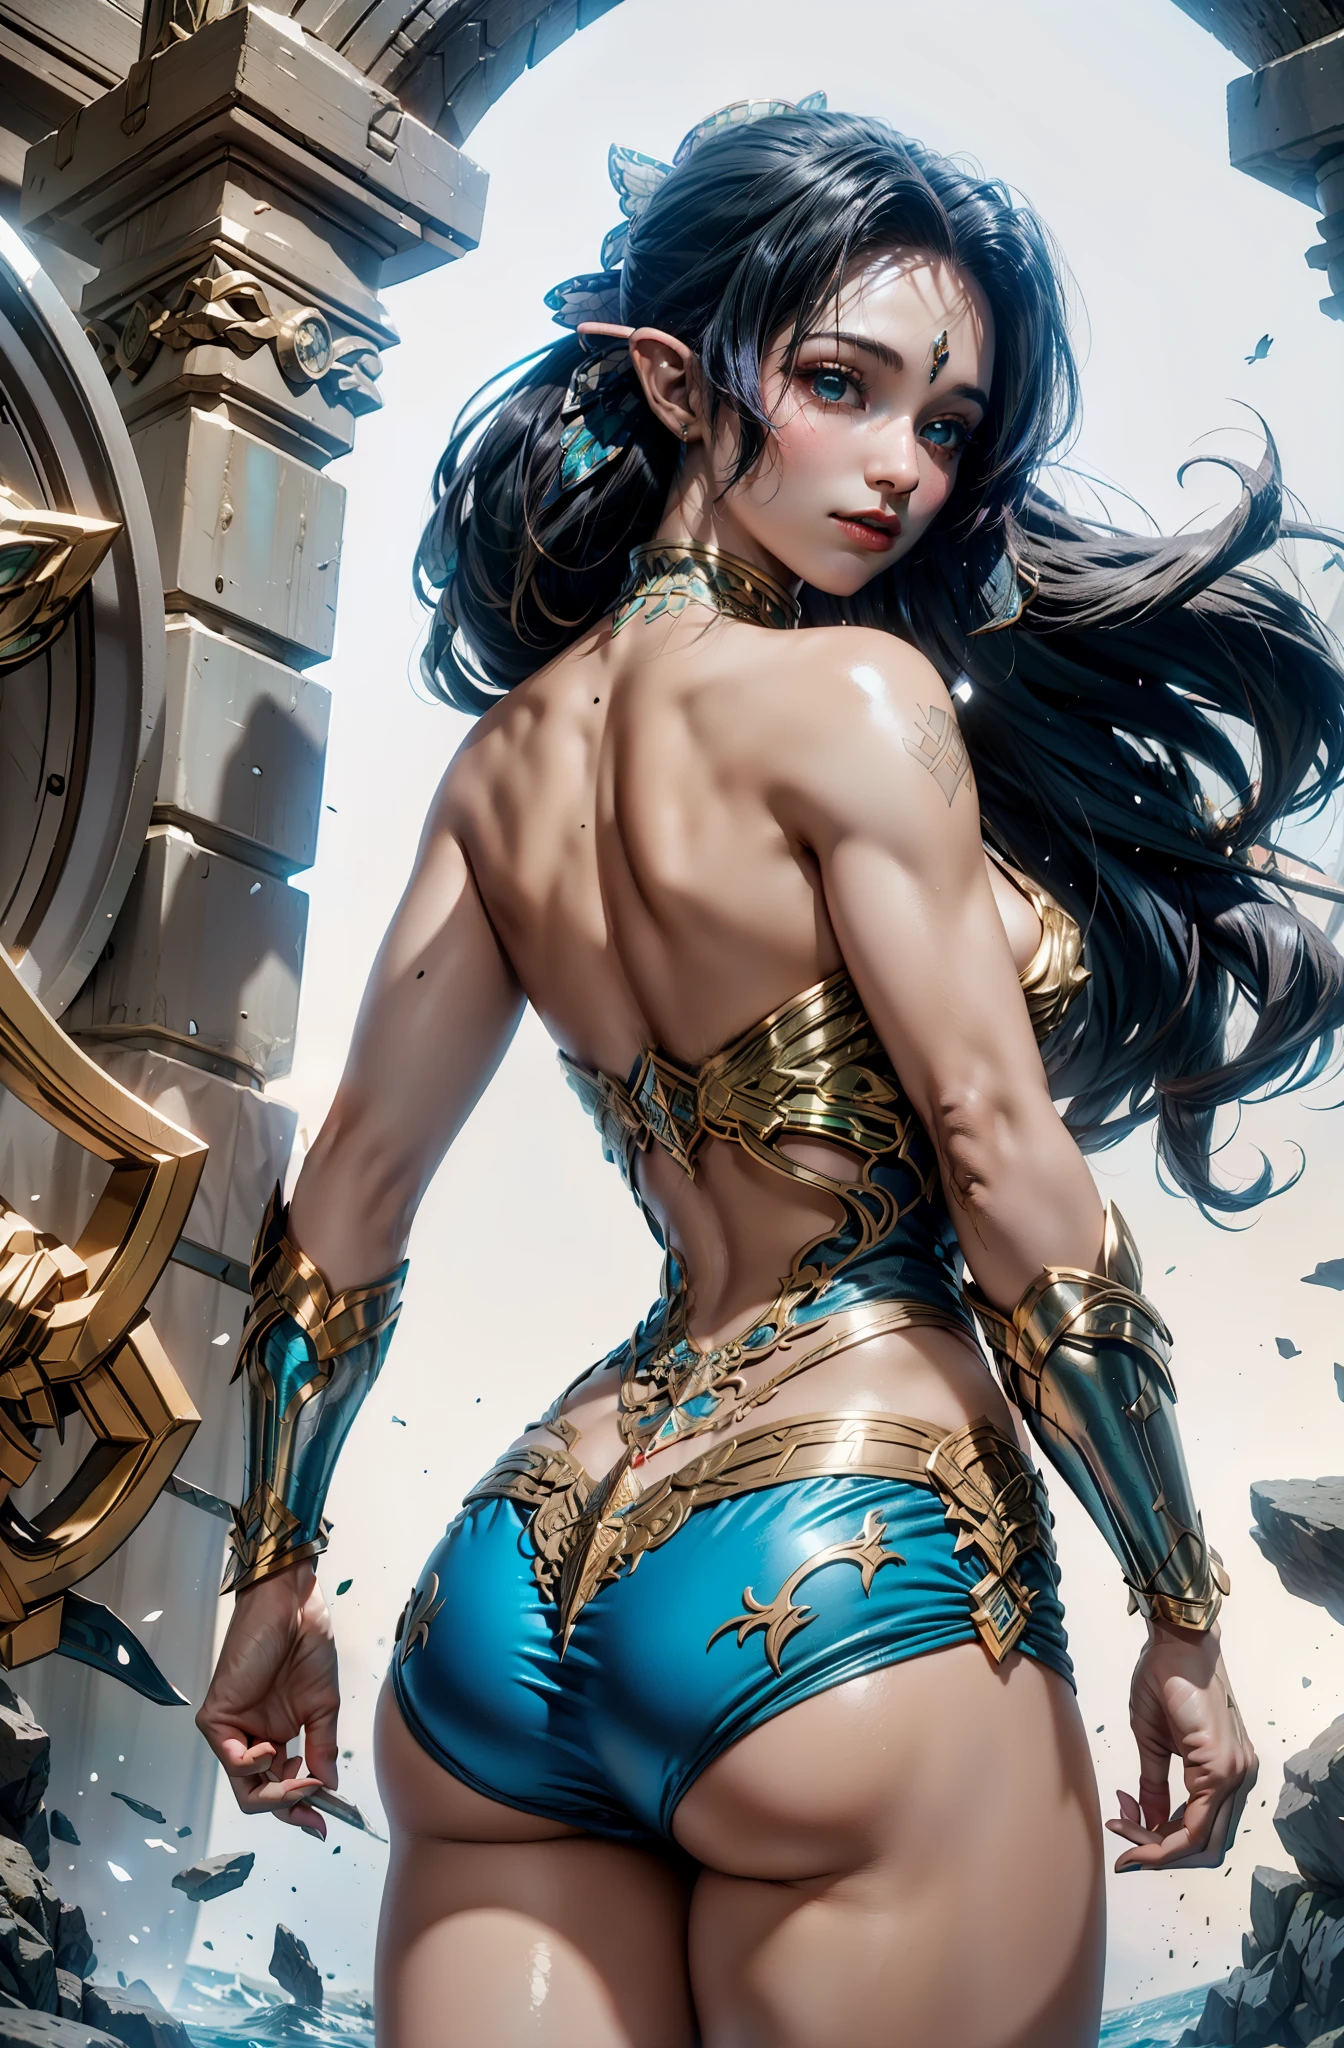 Asgard，Valkyrie, woman with perfect body, with a toned and muscular body. anatomical correct，epic fantasy digital art，Masterpiece artwork，8K，High definition resolution，detailed drawing，Quality Superior，, epic composition